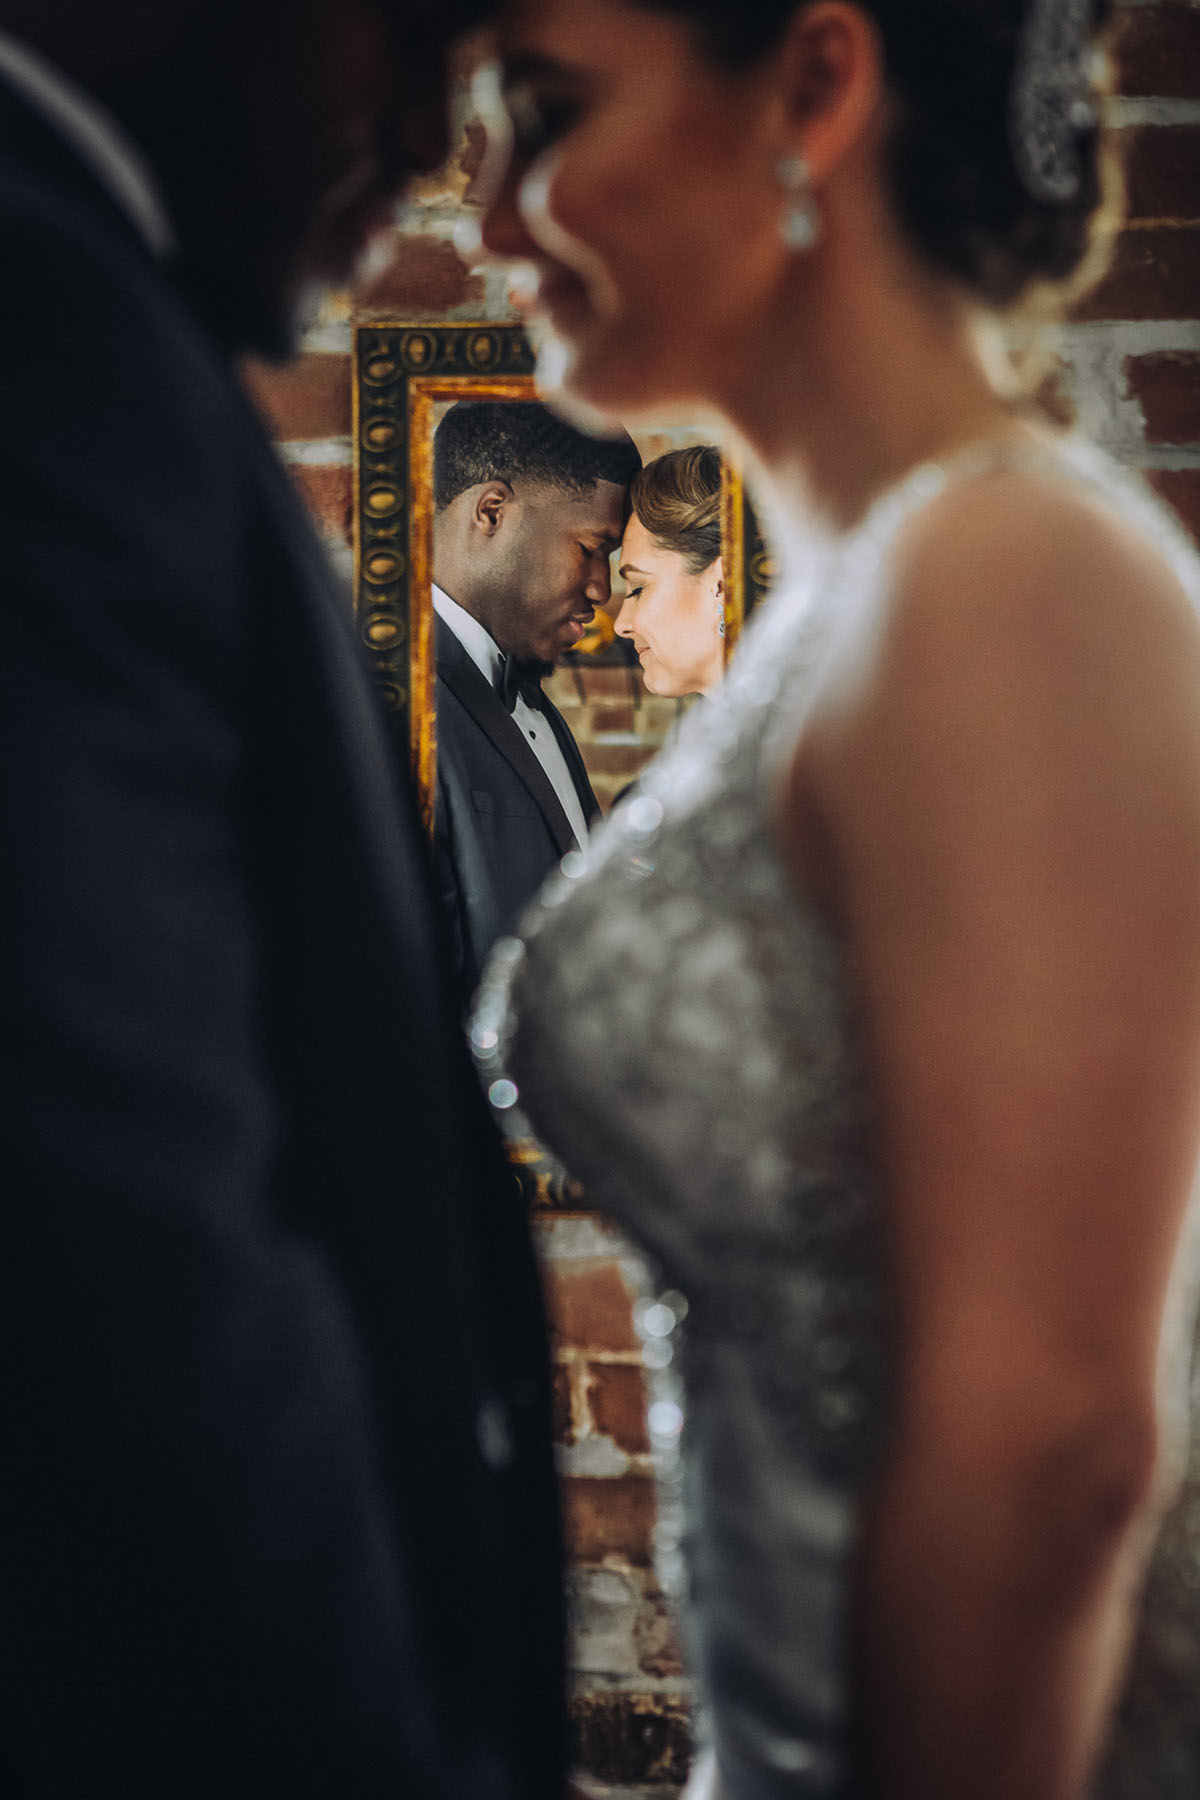 An artistic portrait of a bride and groom with a mirror reflection. Photo: Capture Studio Photography